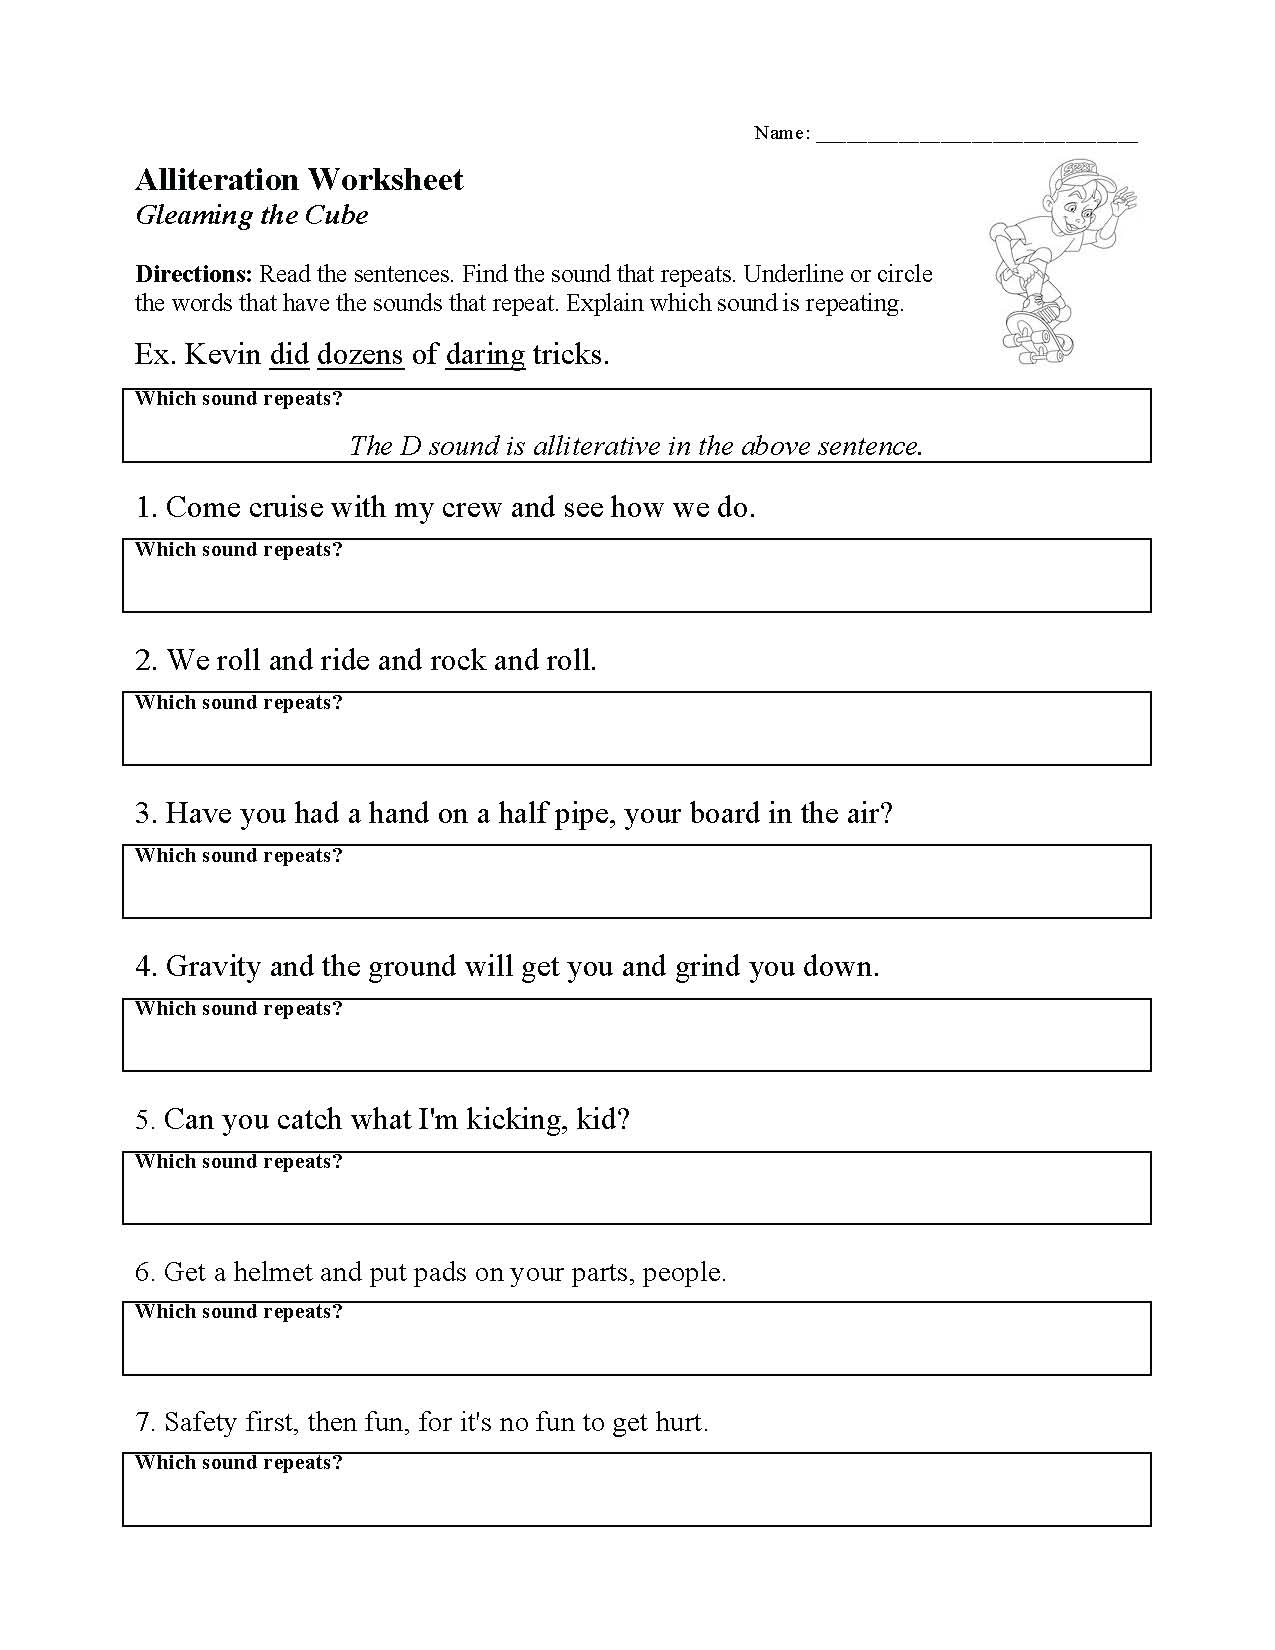 This is a preview image of our Literary Techniques Worksheets. Click on it to view all of our worksheets covering literary techniques.